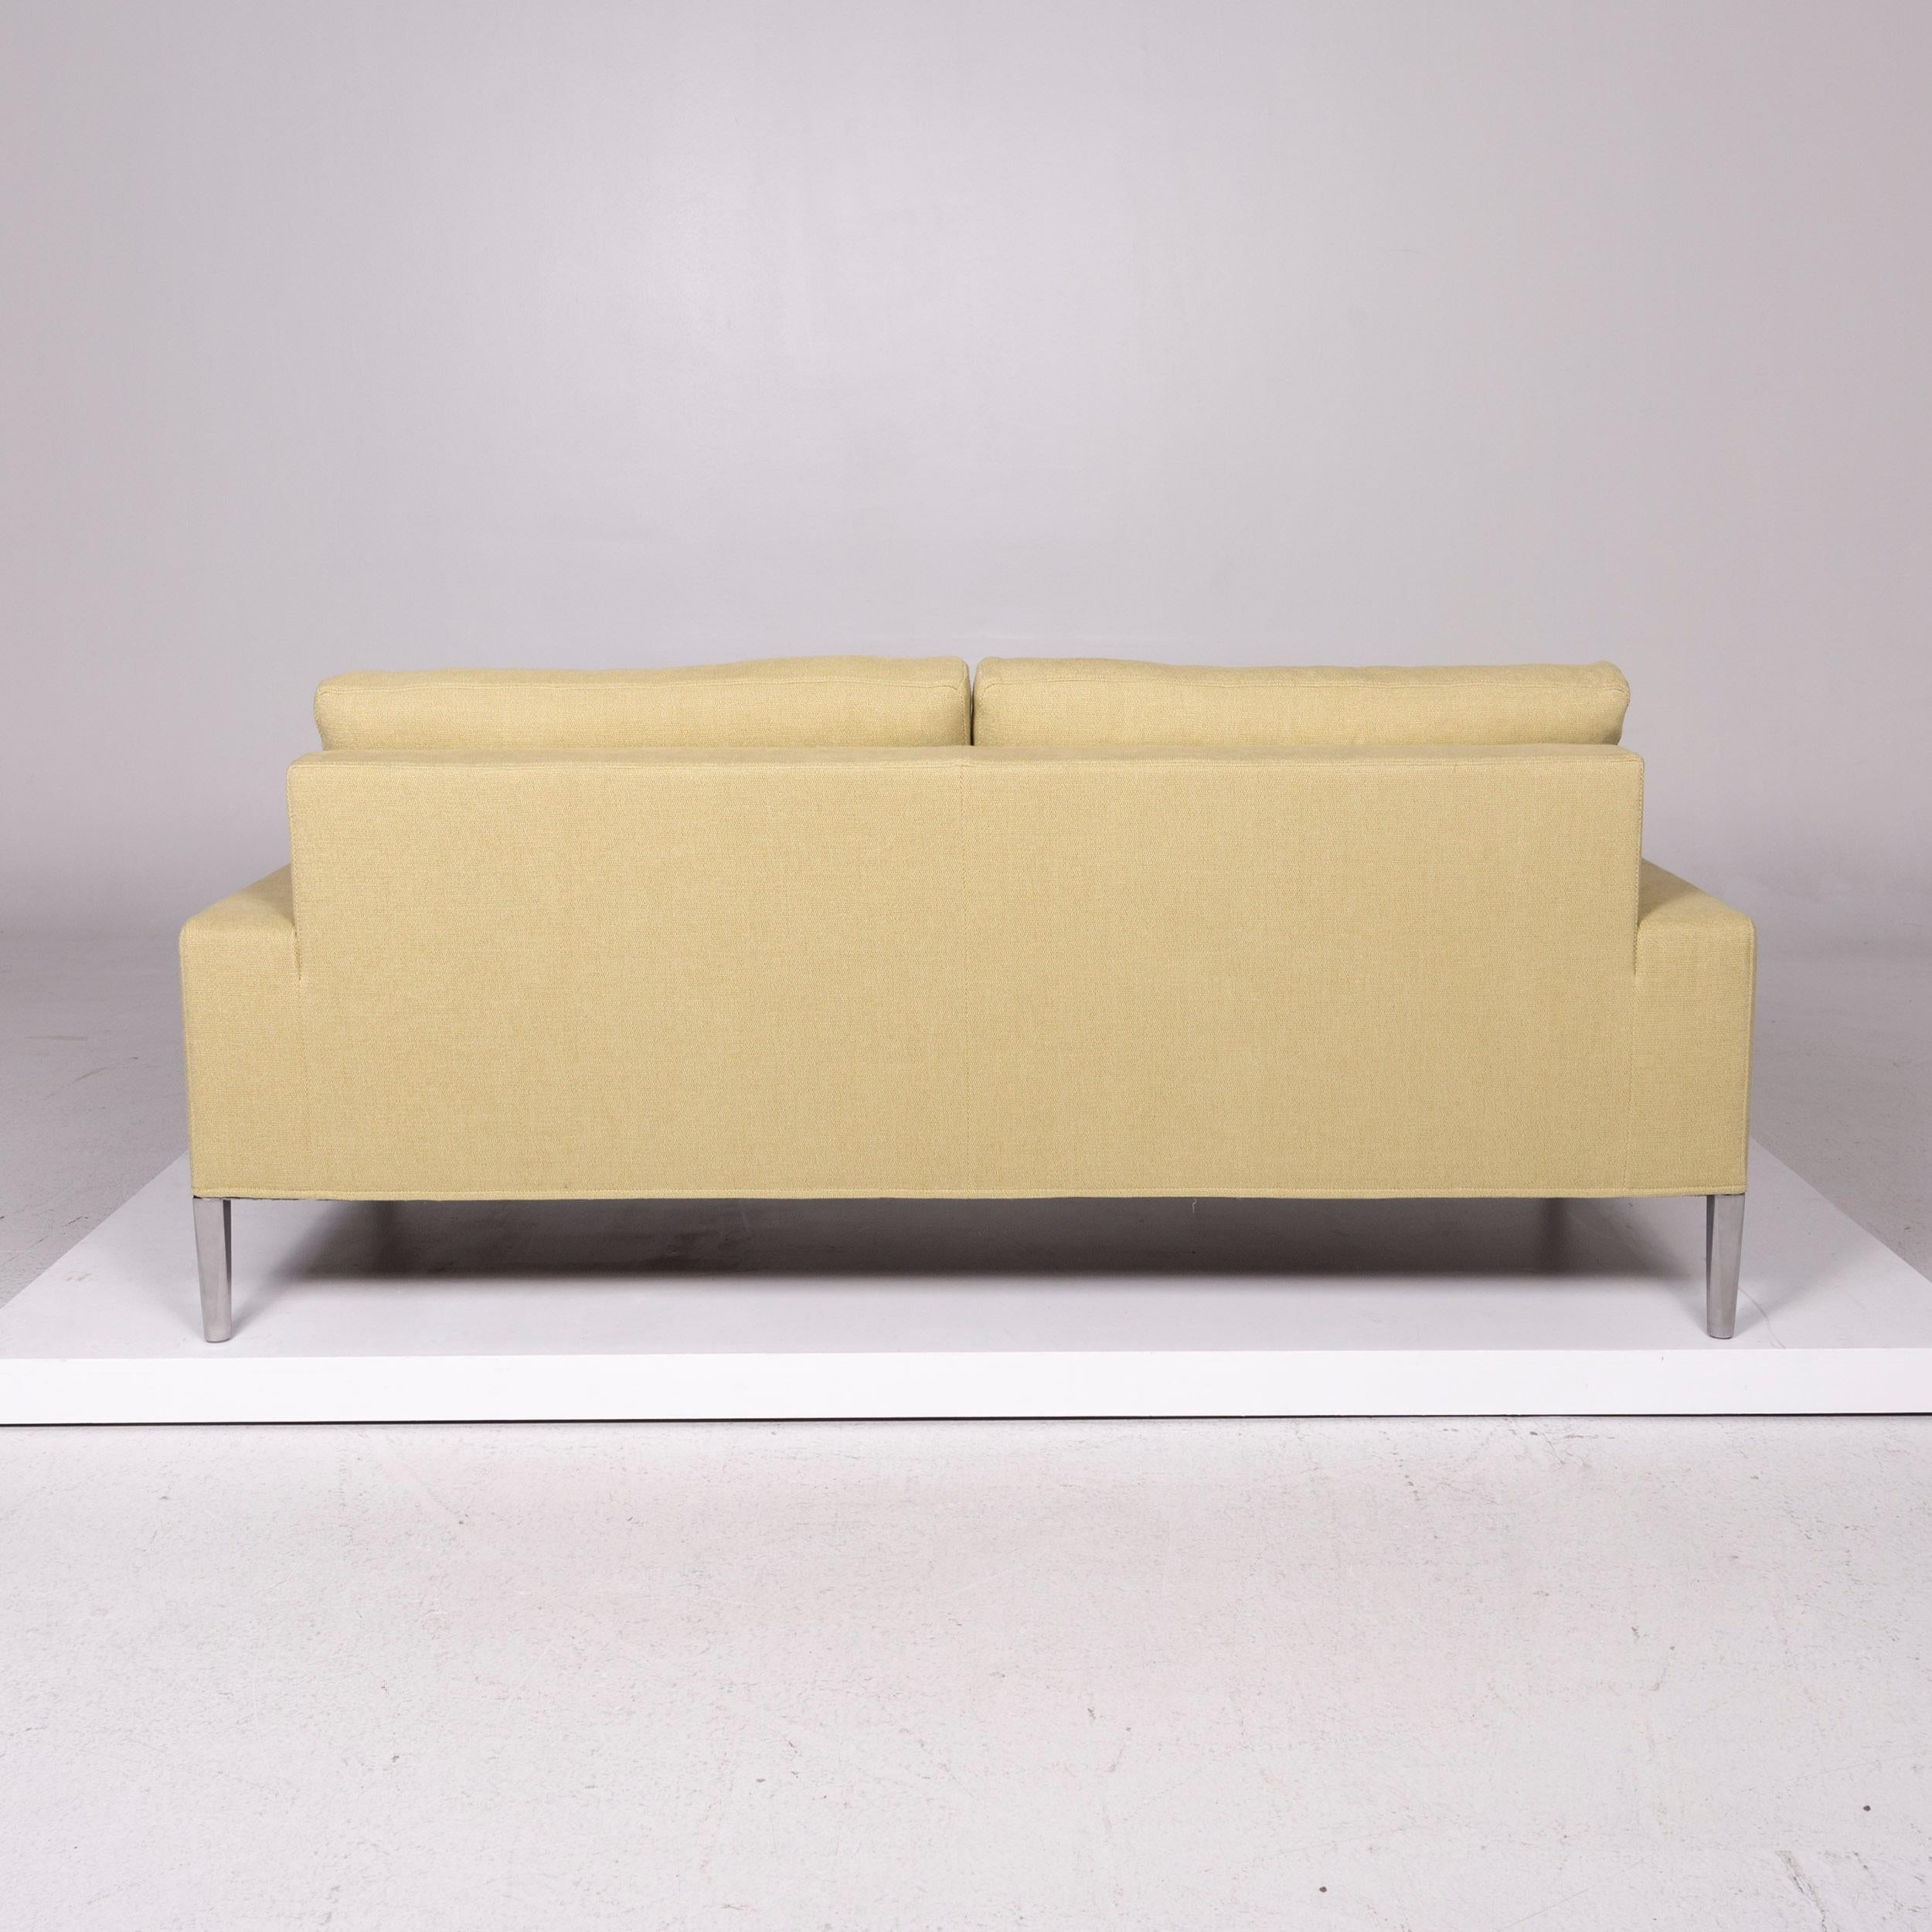 Contemporary FSM Clarus Fabric Sofa Yellow Lemon Yellow Two-Seat Couch